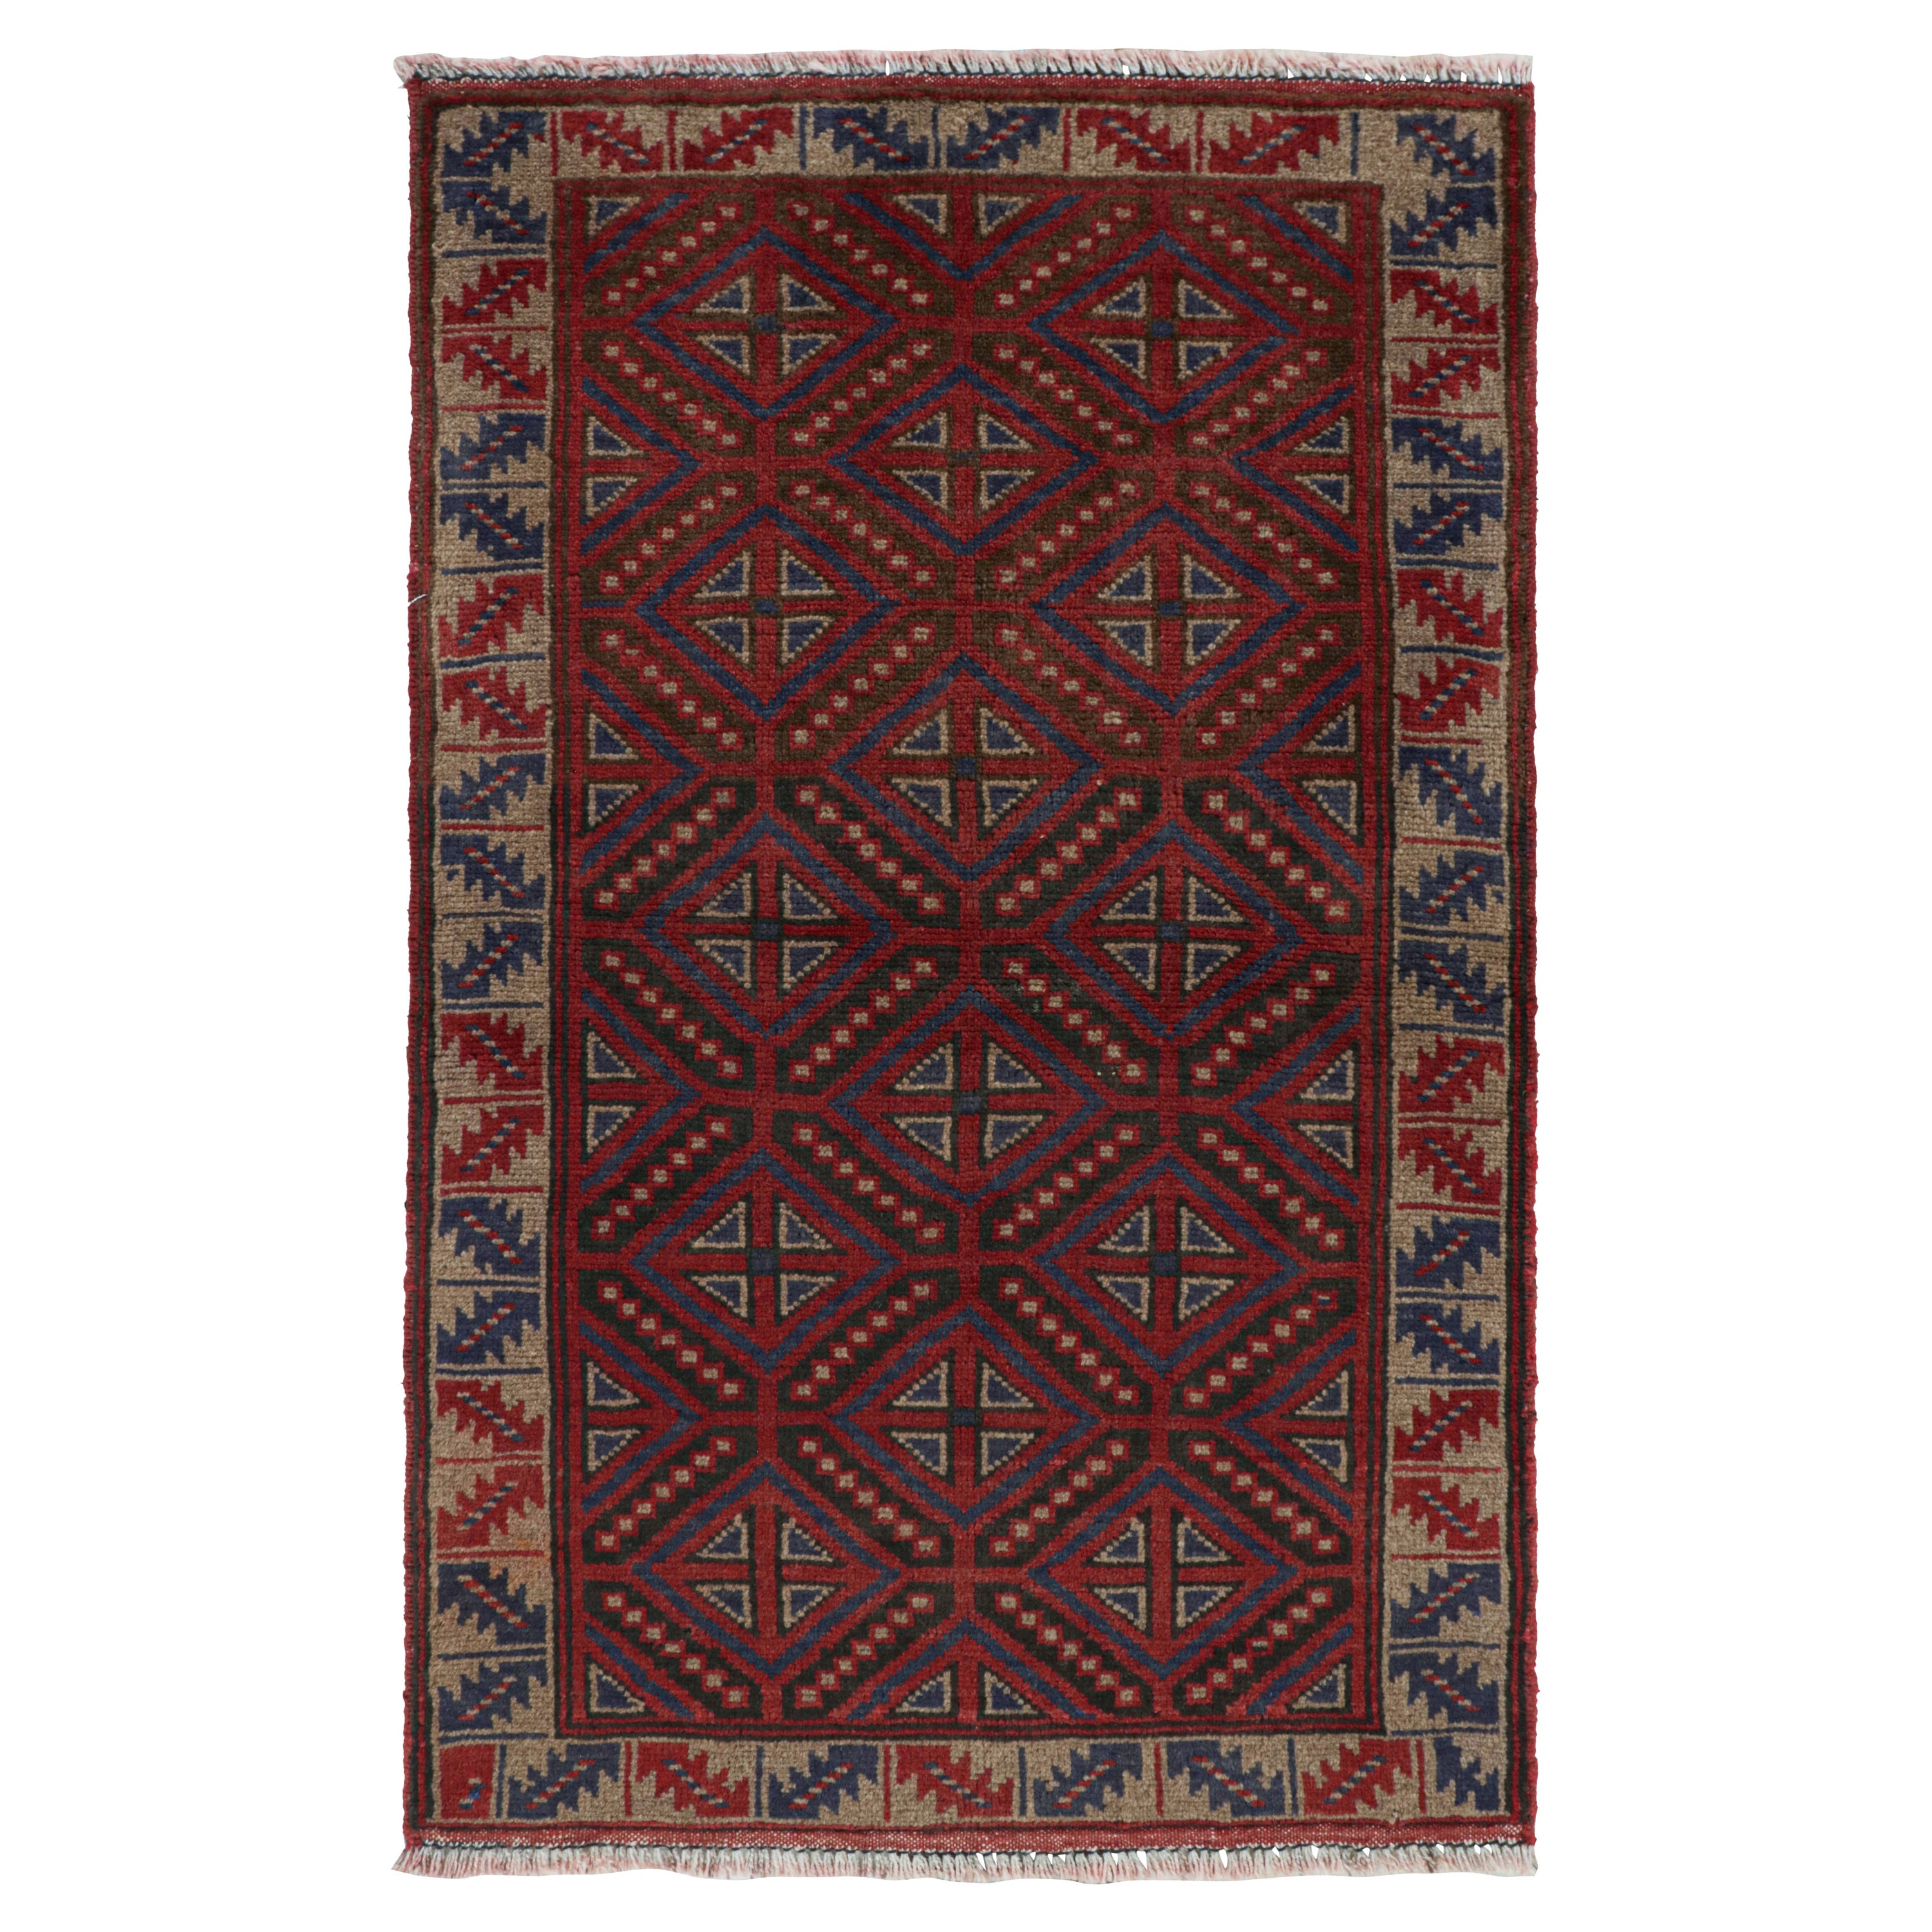 Vintage Baluch Tribal Rug in Red with Geometric Patterns, from Rug & Kilim